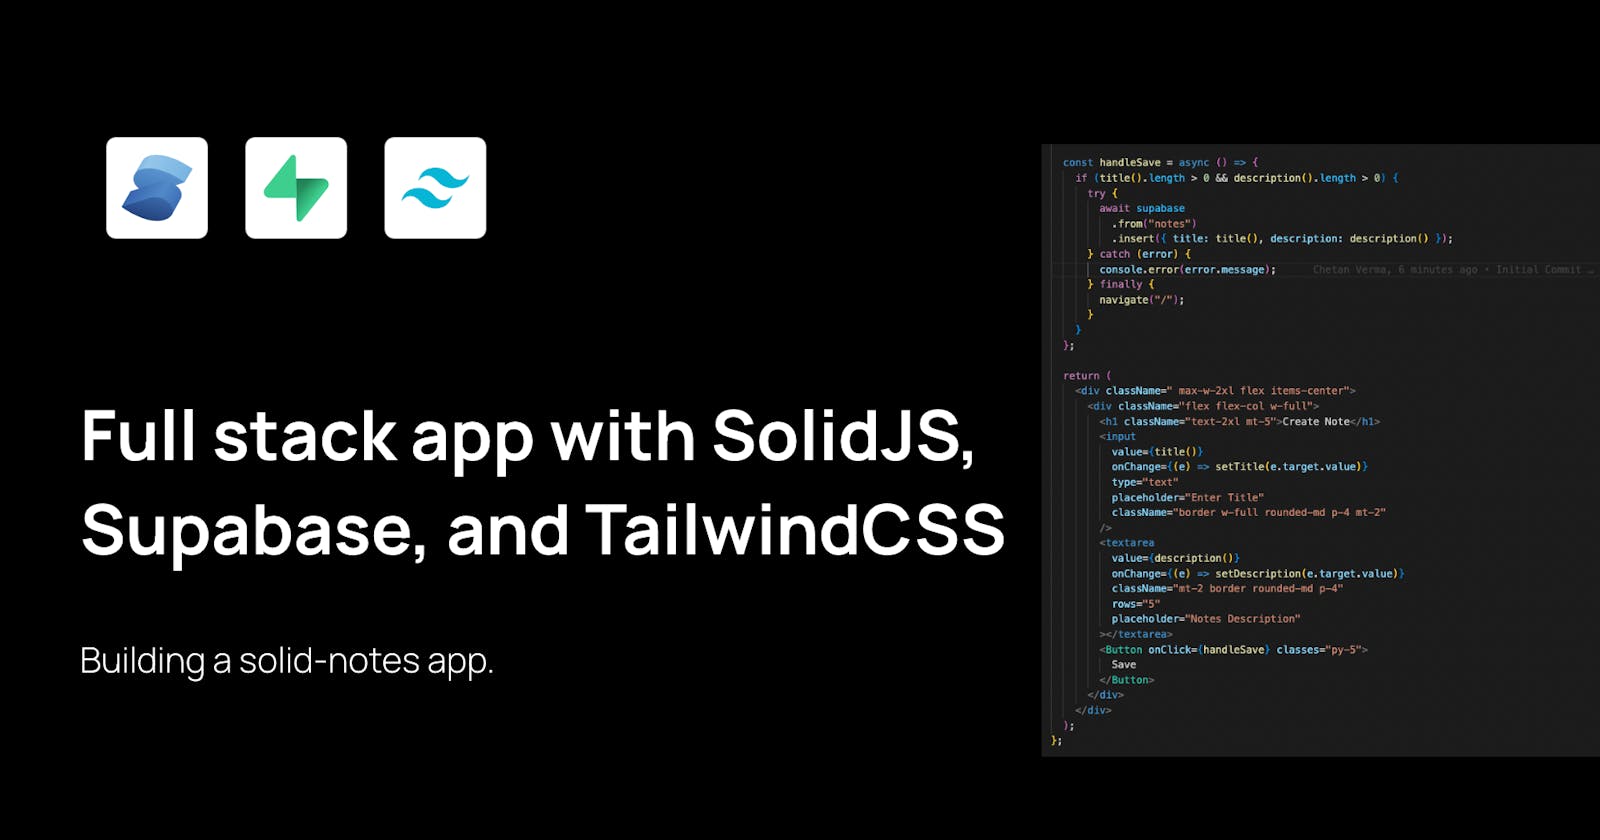 How To Create a Full Stack app with SolidJS, Supabase, and TailwindCSS